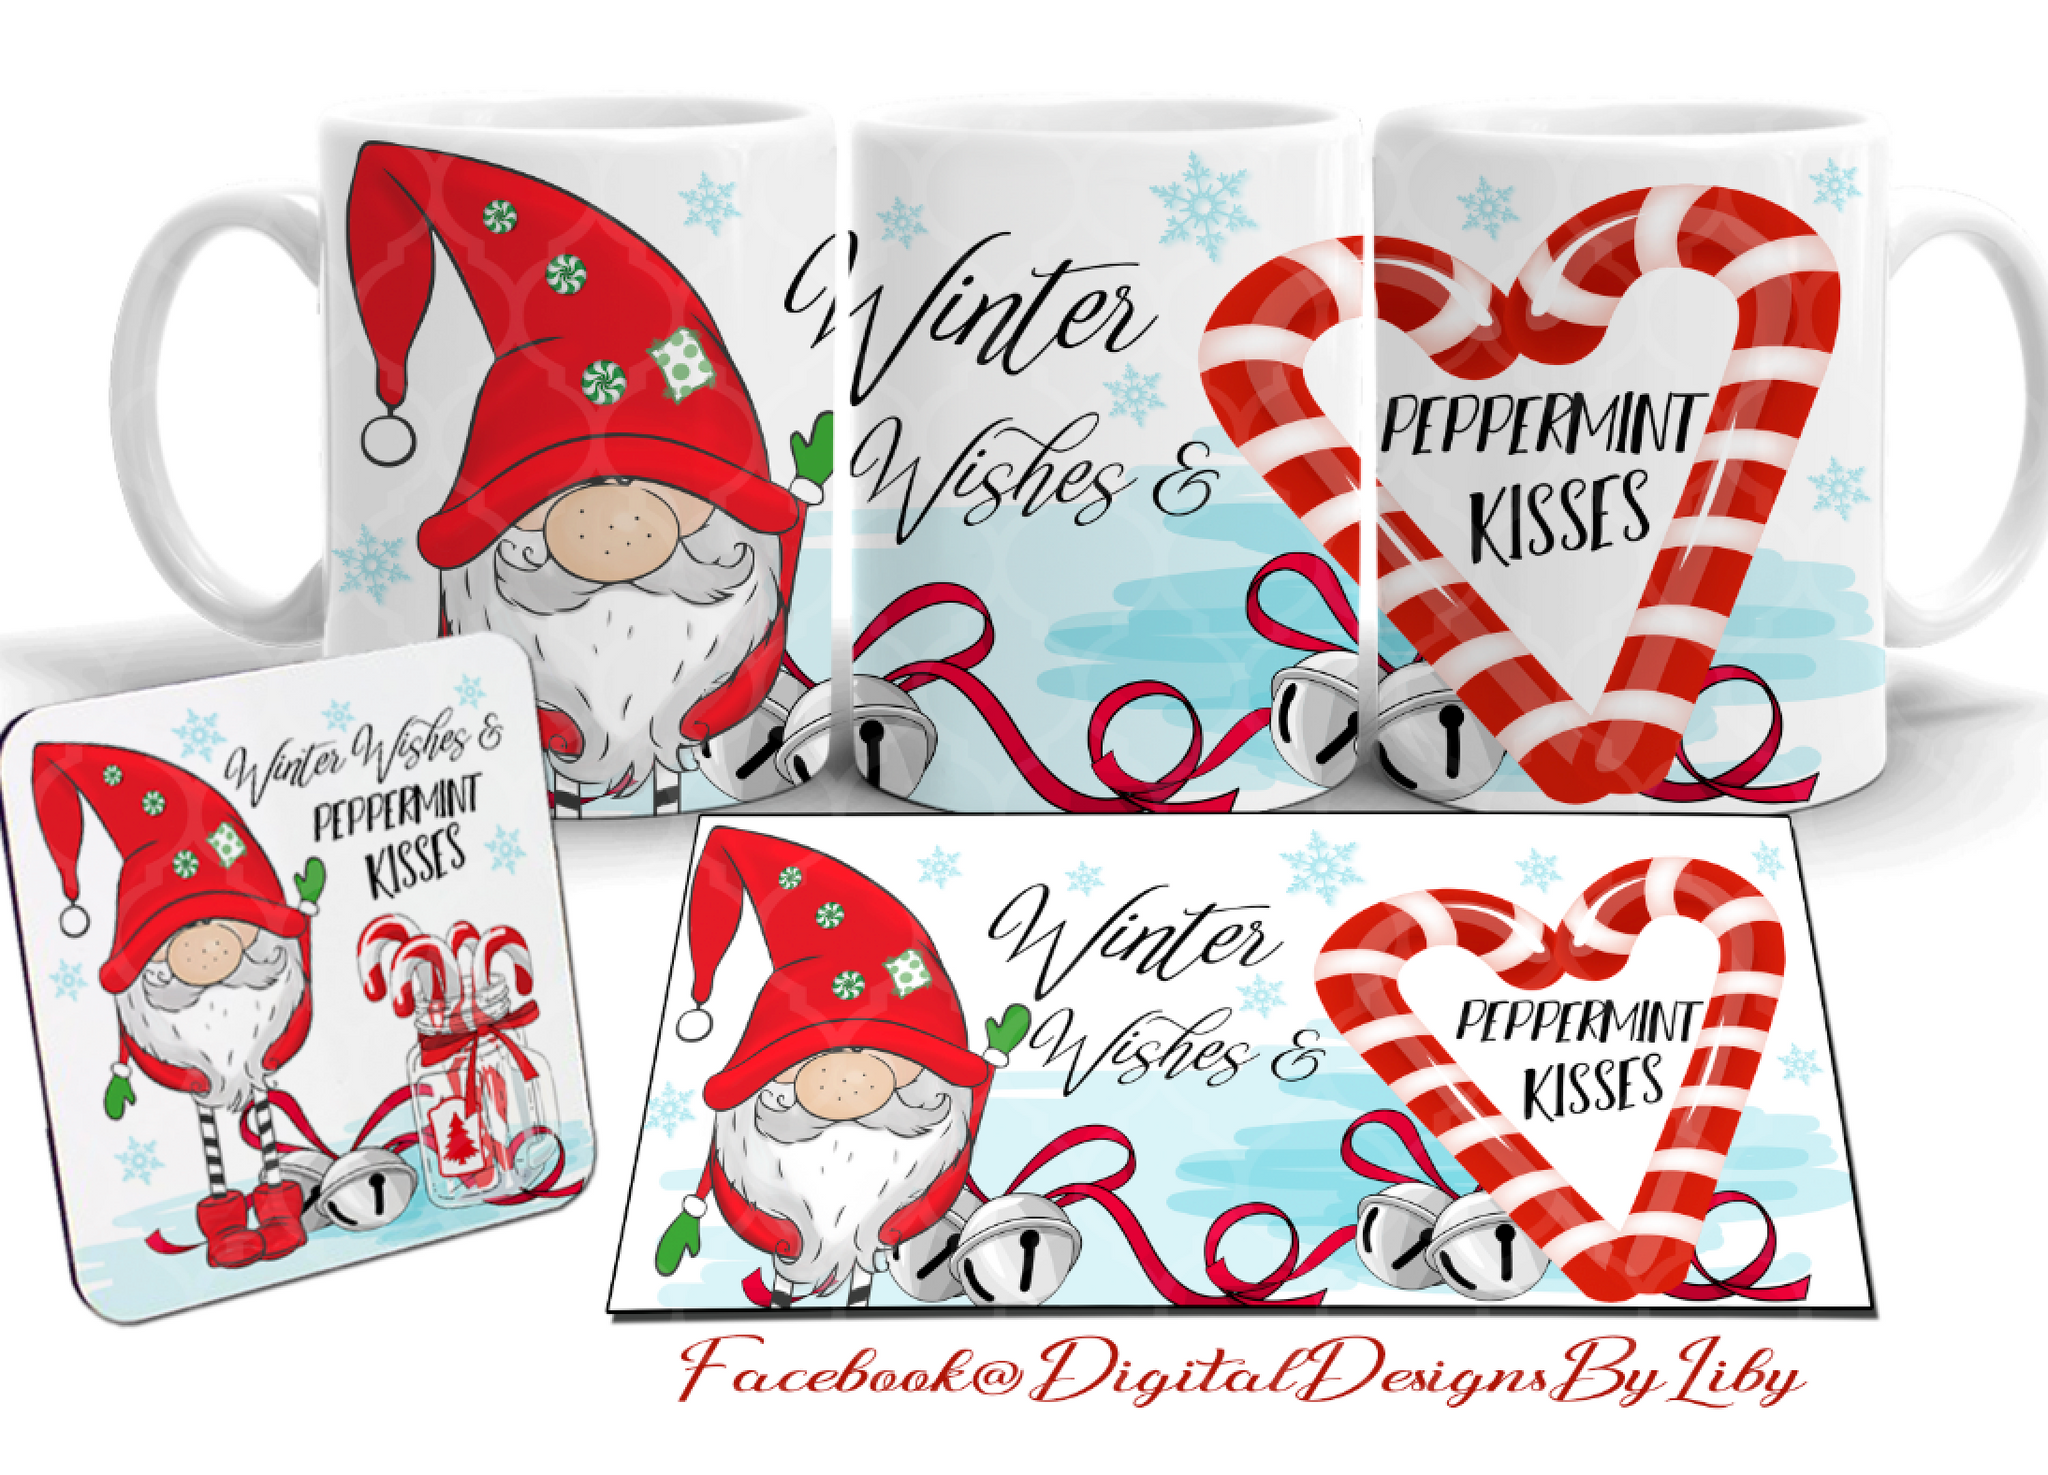 WINTER WISHES & PEPPERMINT KISSES (Mug & Coaster Designs)